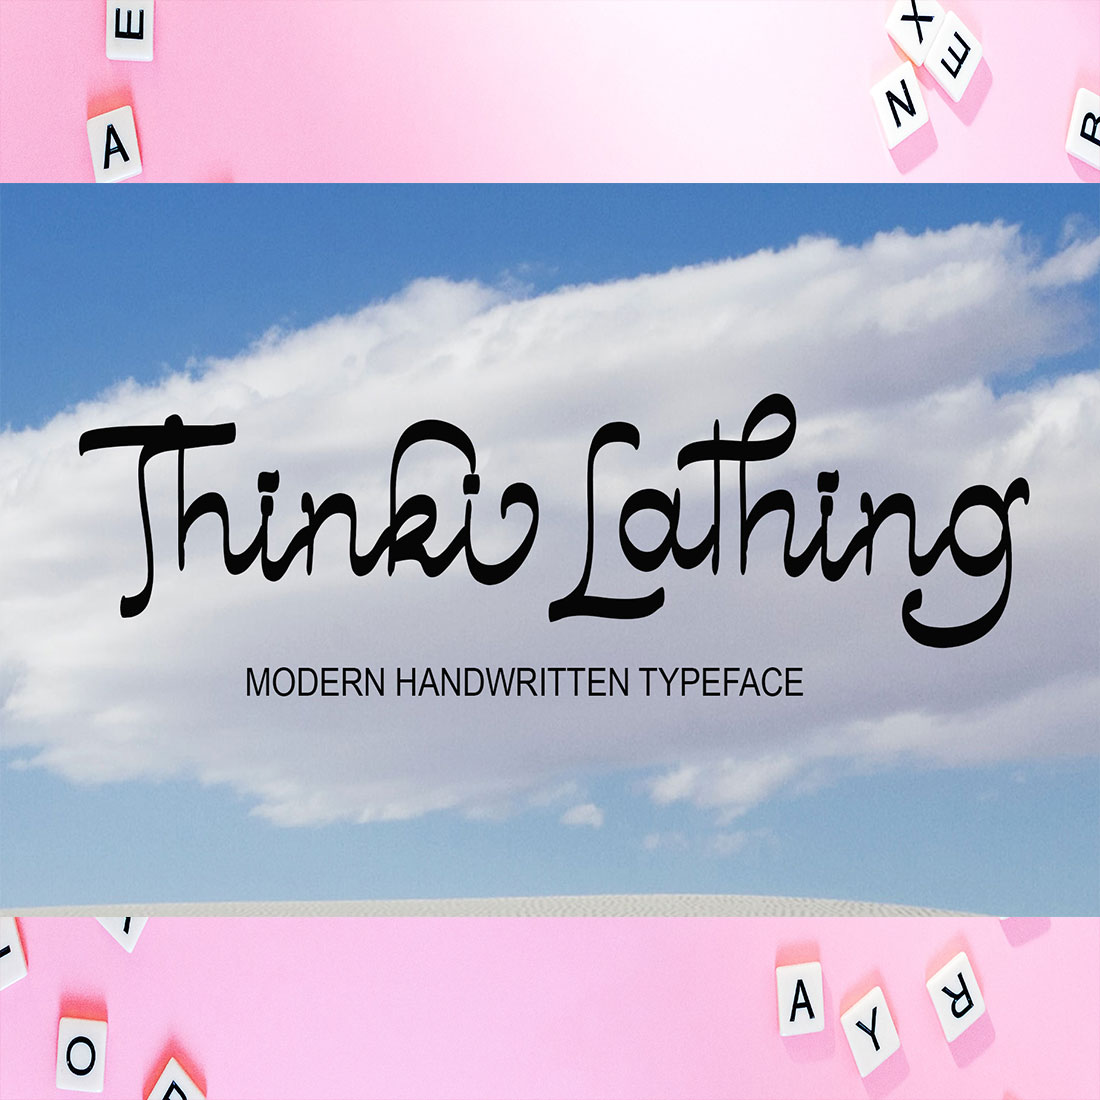 Cover of the adorable Thinki Lathing font.